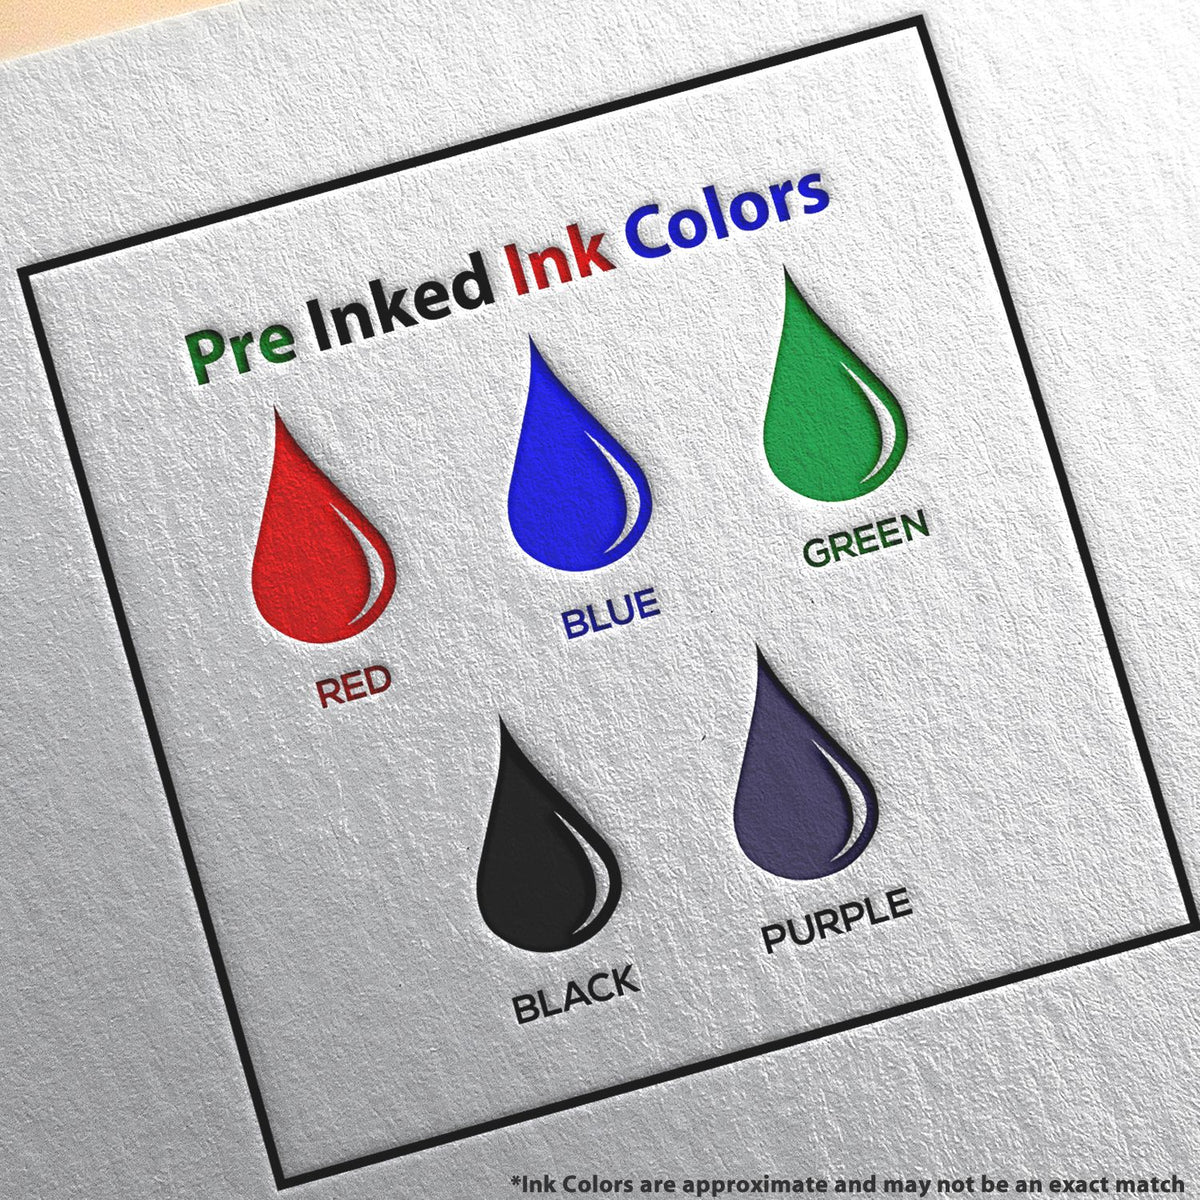 A picture showing the different ink colors or hues available for the Super Slim Illinois Notary Public Stamp product.